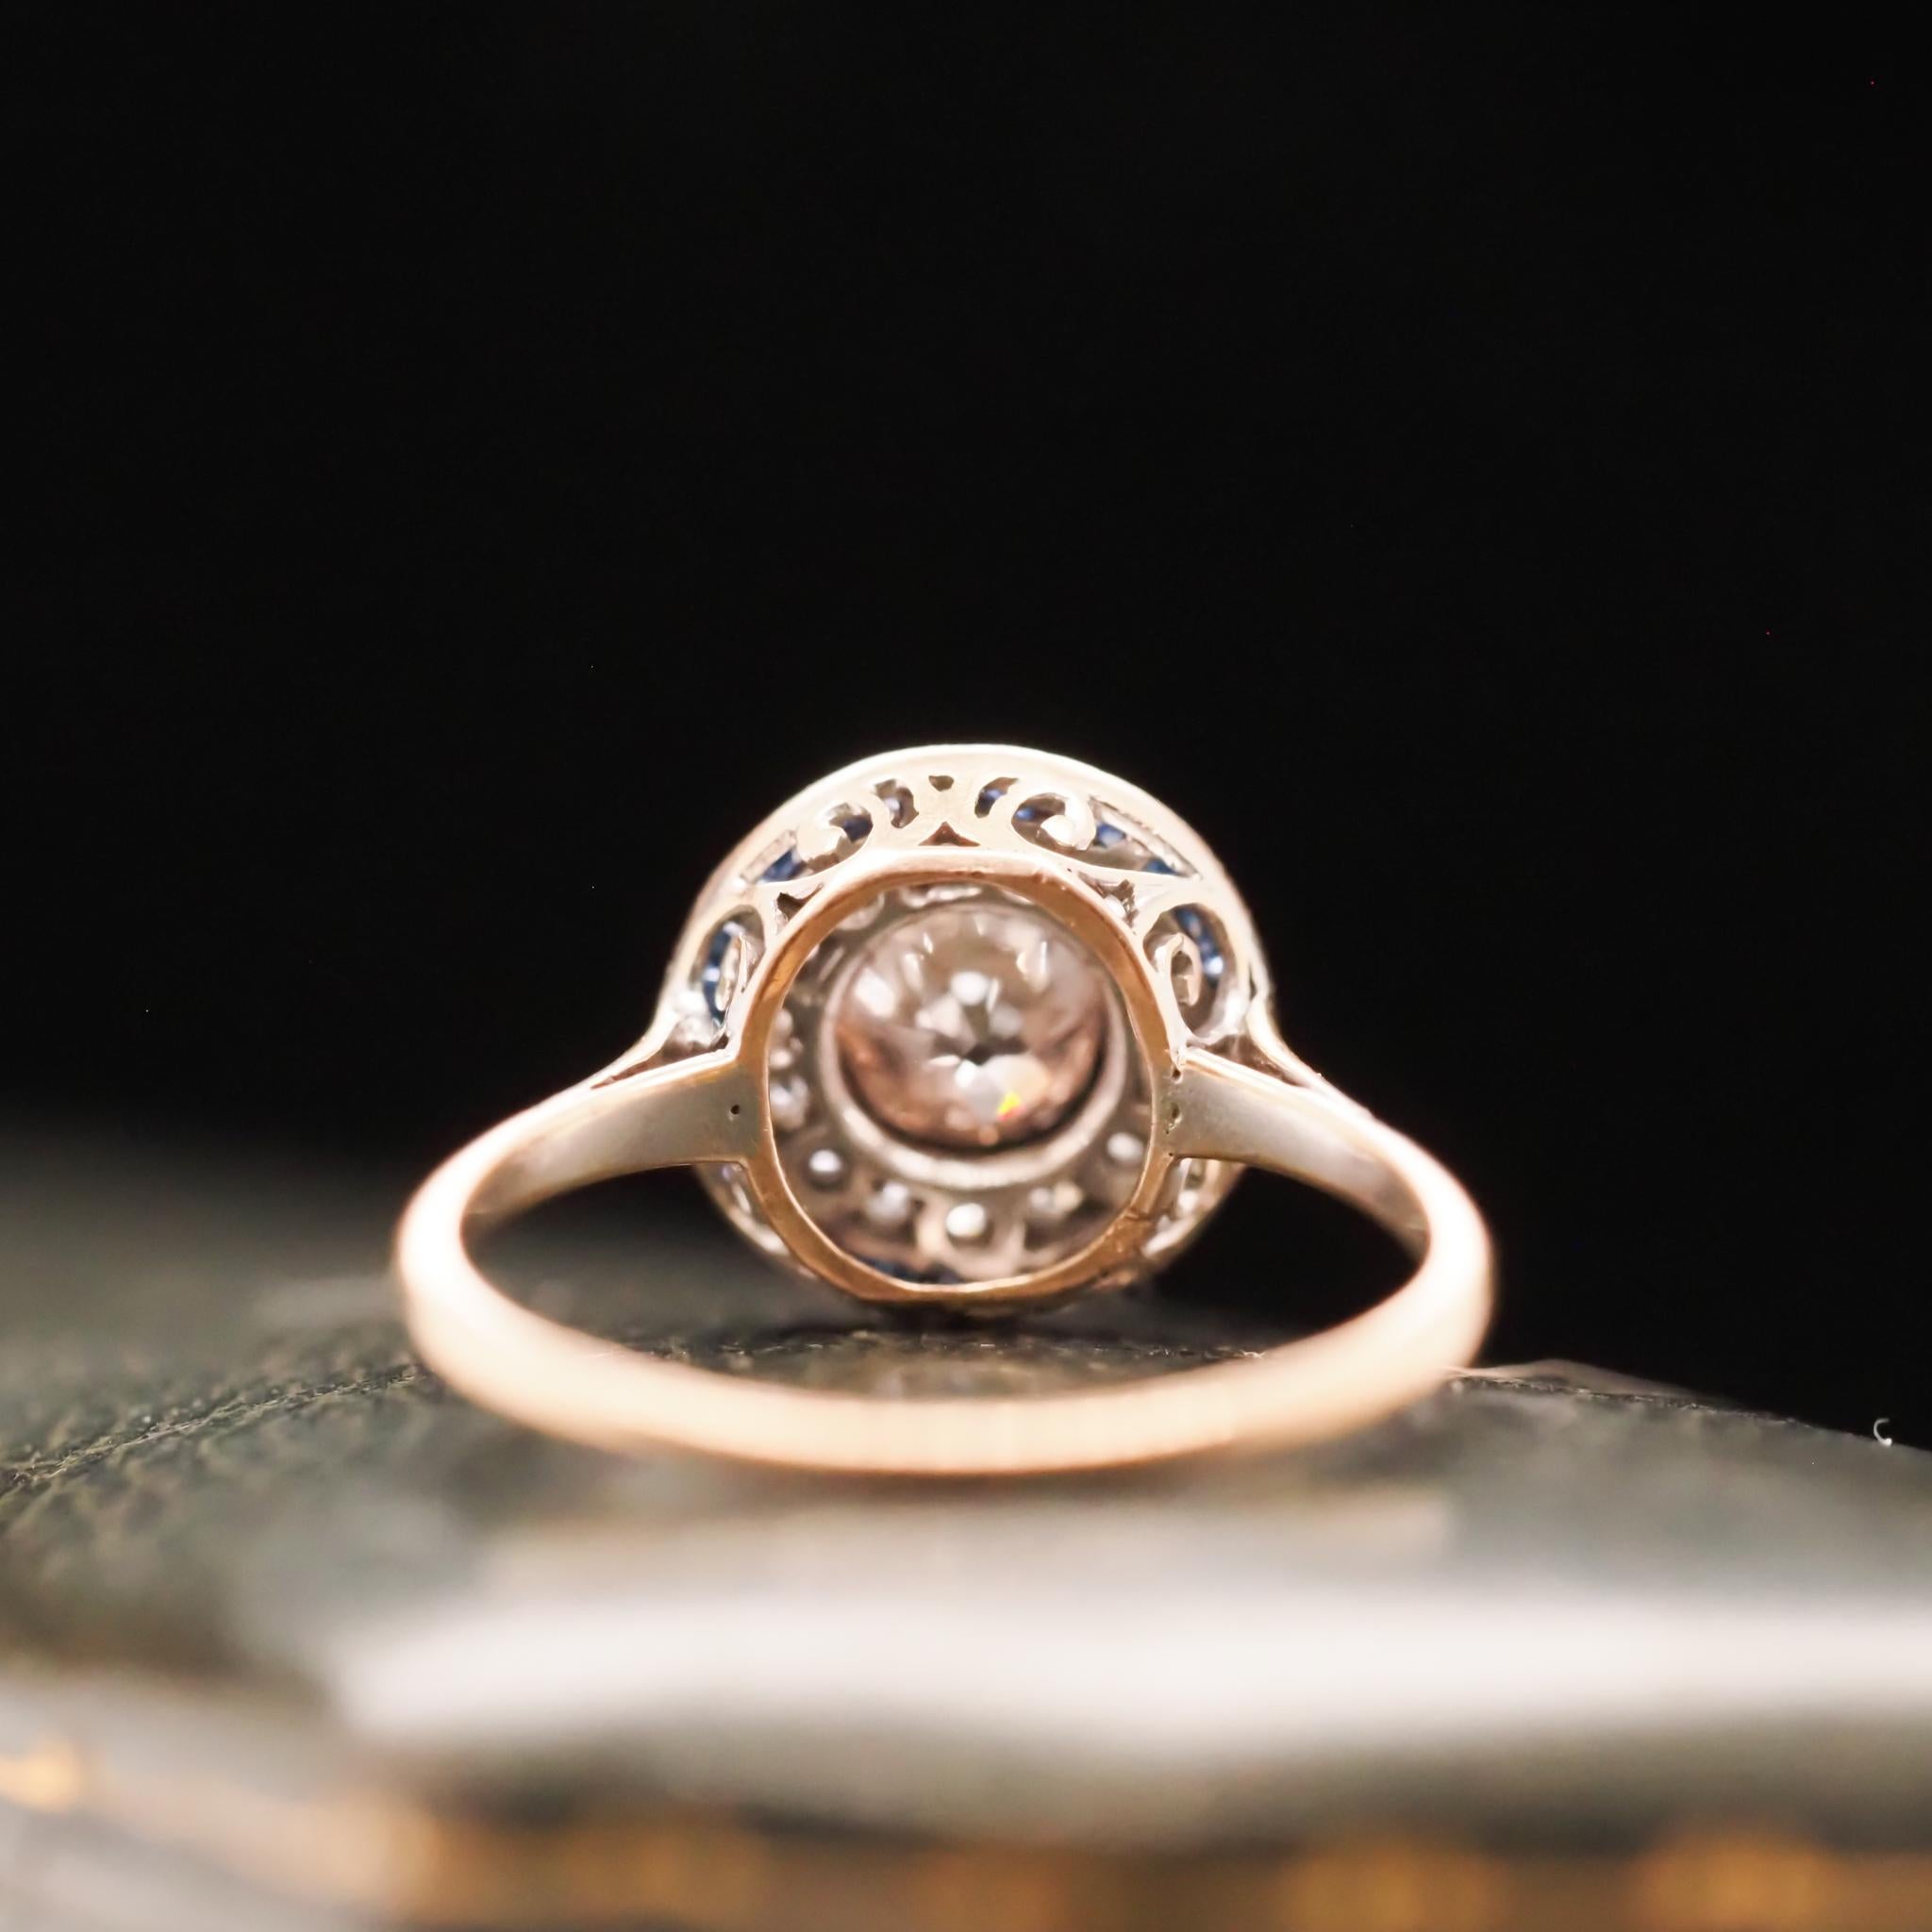 Year: 1920s
Item Details:
Ring Size: 6.25 (Sizable)
Metal Type: 14K Yellow Gold [Hallmarked, and Tested]
Weight: 2.4 grams
Diamond Details: Center Diamond: .55ct, Old Mine Brilliant, Fancy Light Brown, VS Clarity.
Side Stone Details: Old European